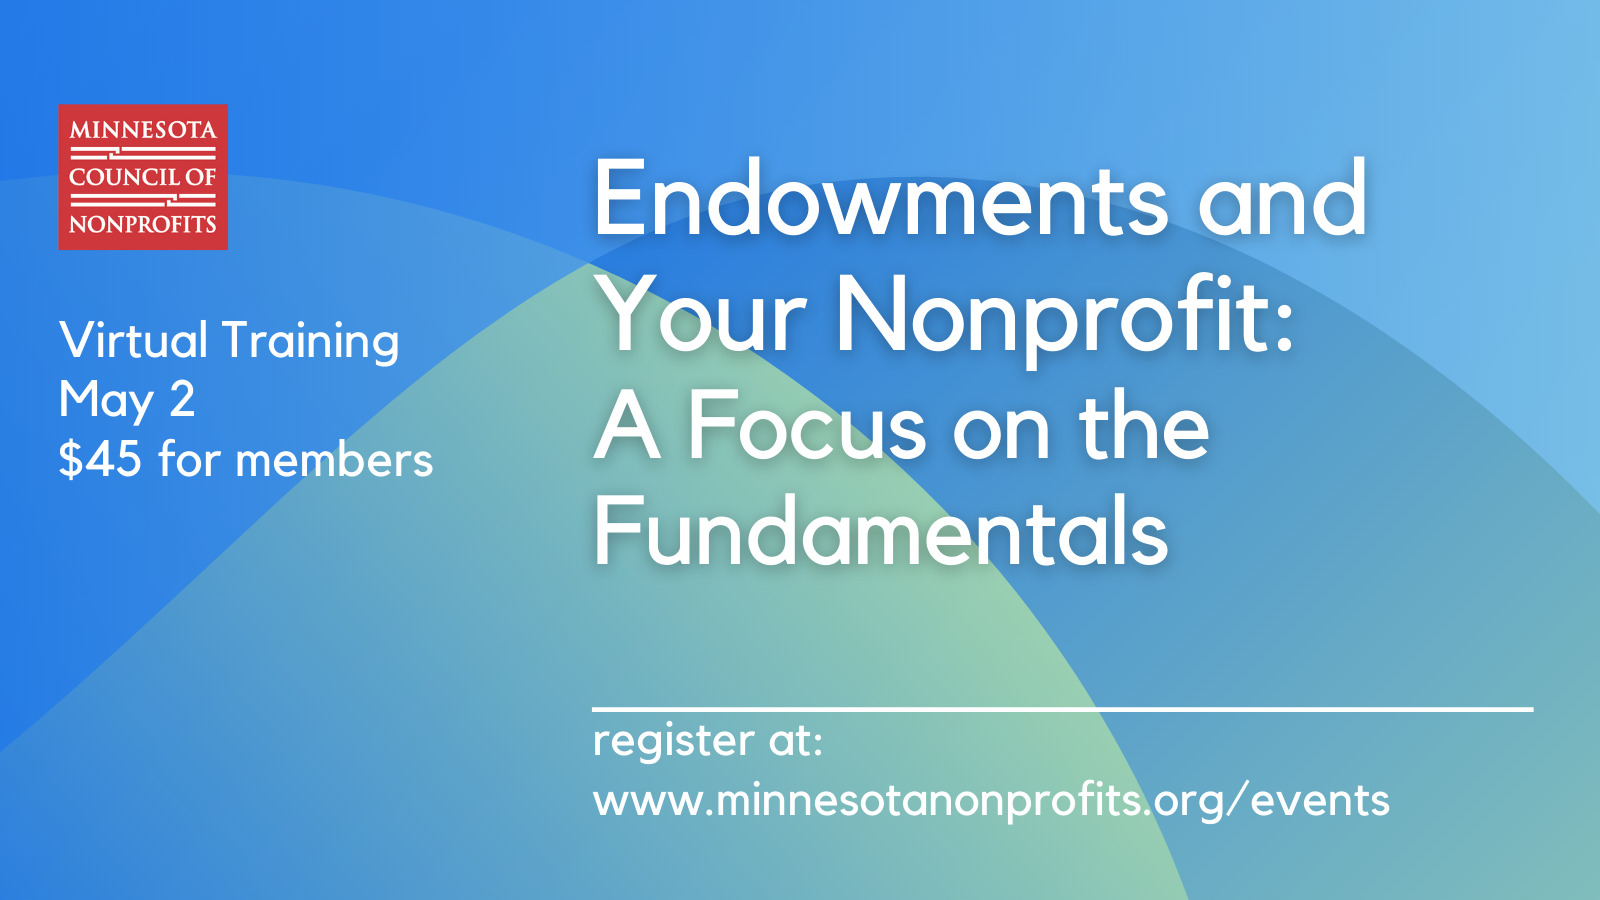 Endowments and Your Nonprofit: Focusing on the Fundamentals